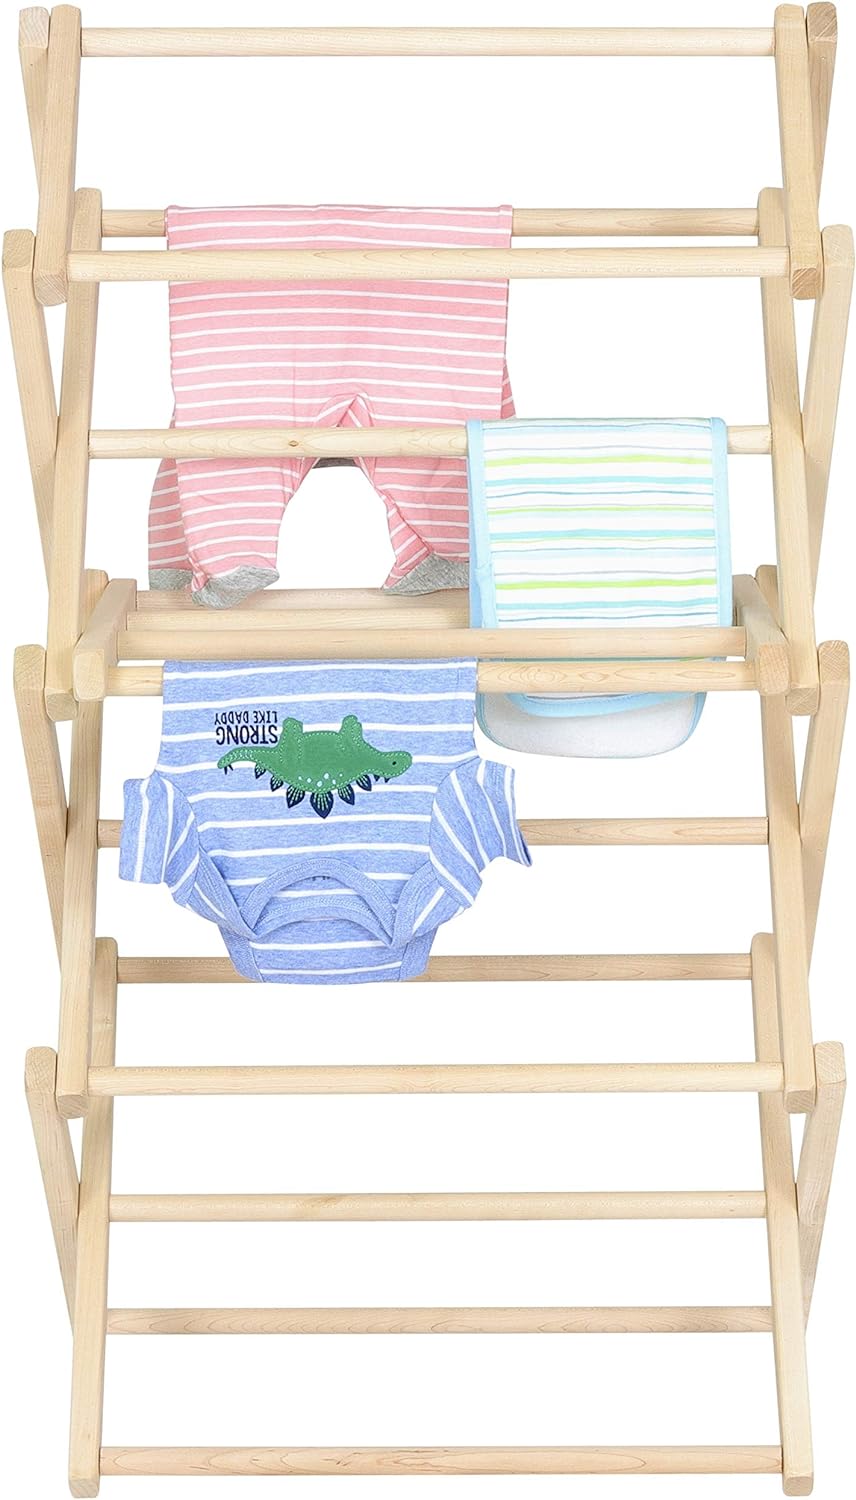 Pennsylvania Woodworks Clothes Drying Rack: Solid Maple Hard Wood Laundry  Rack for Baby Clothes, Hand Towels, Delicates & More, Durable Small Folding  Drying Rack, Made in USA, No Assembly Needed